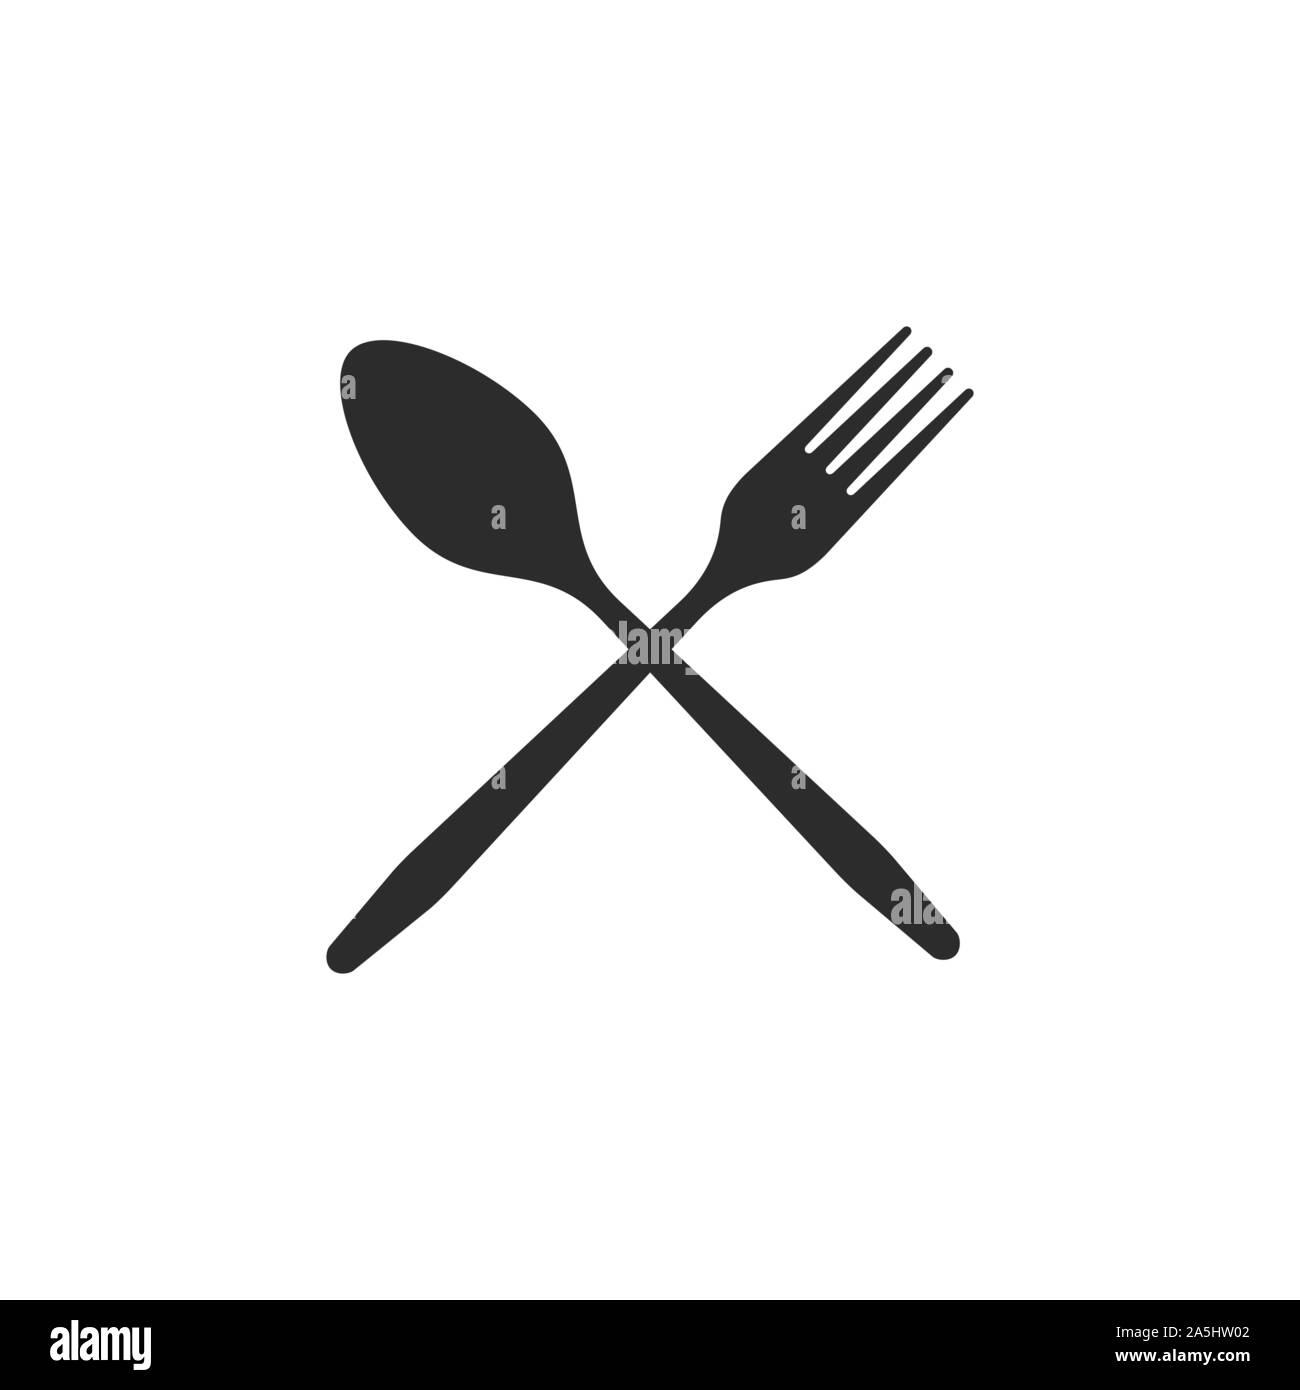 Cutlery. Crossed spoon and fork black icons on a white background. Stock Vector